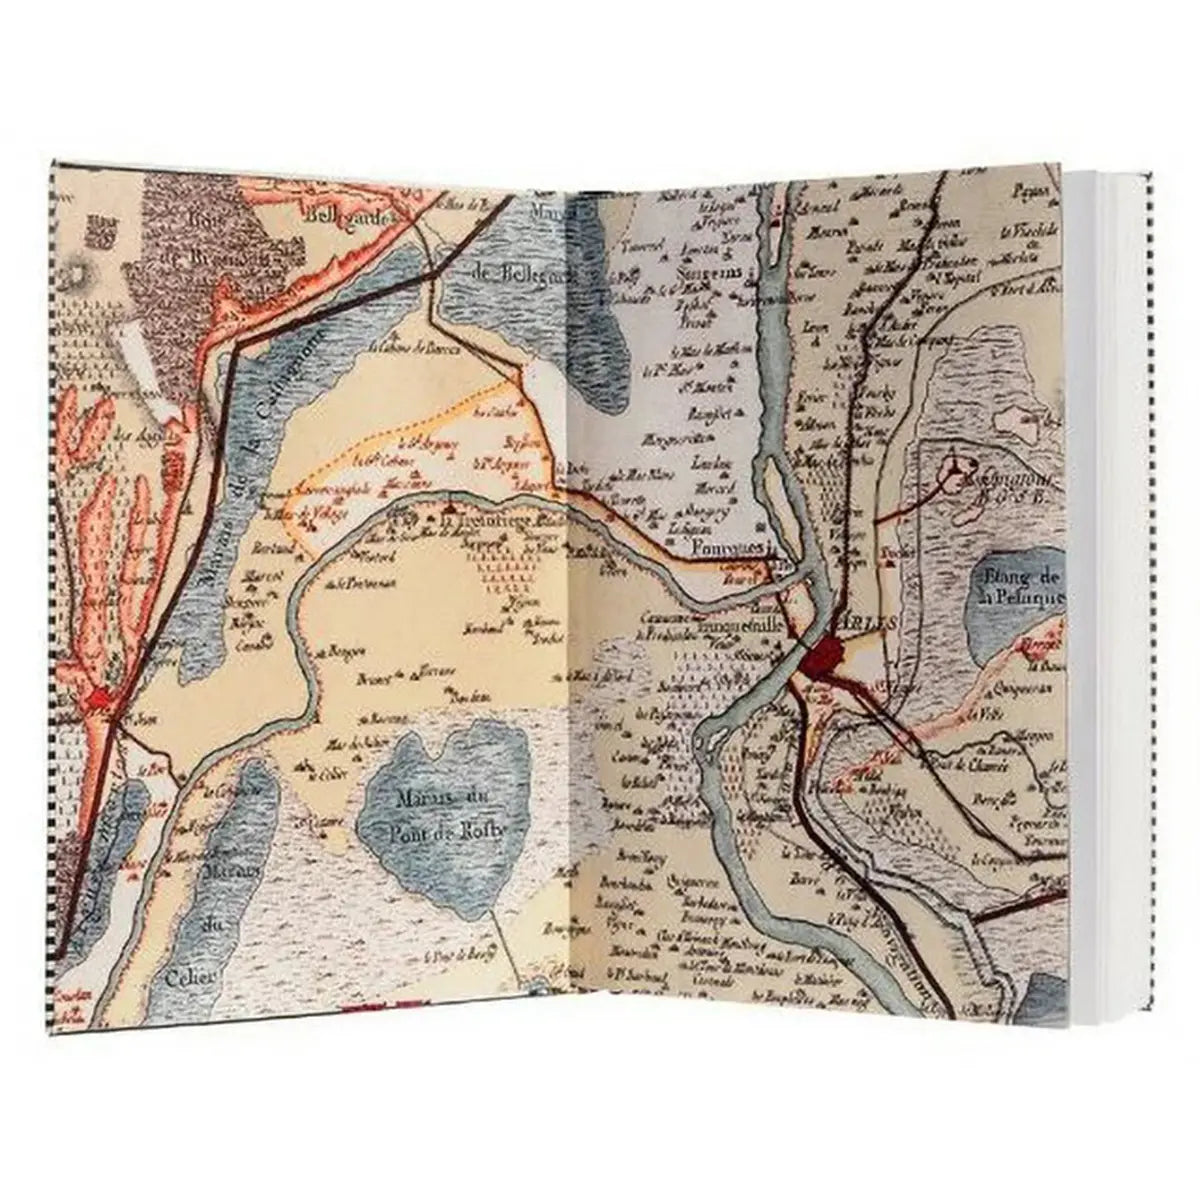 Inside of Hachette Christian Lacroix Feria A6 Notebook showing a map of an area in italy